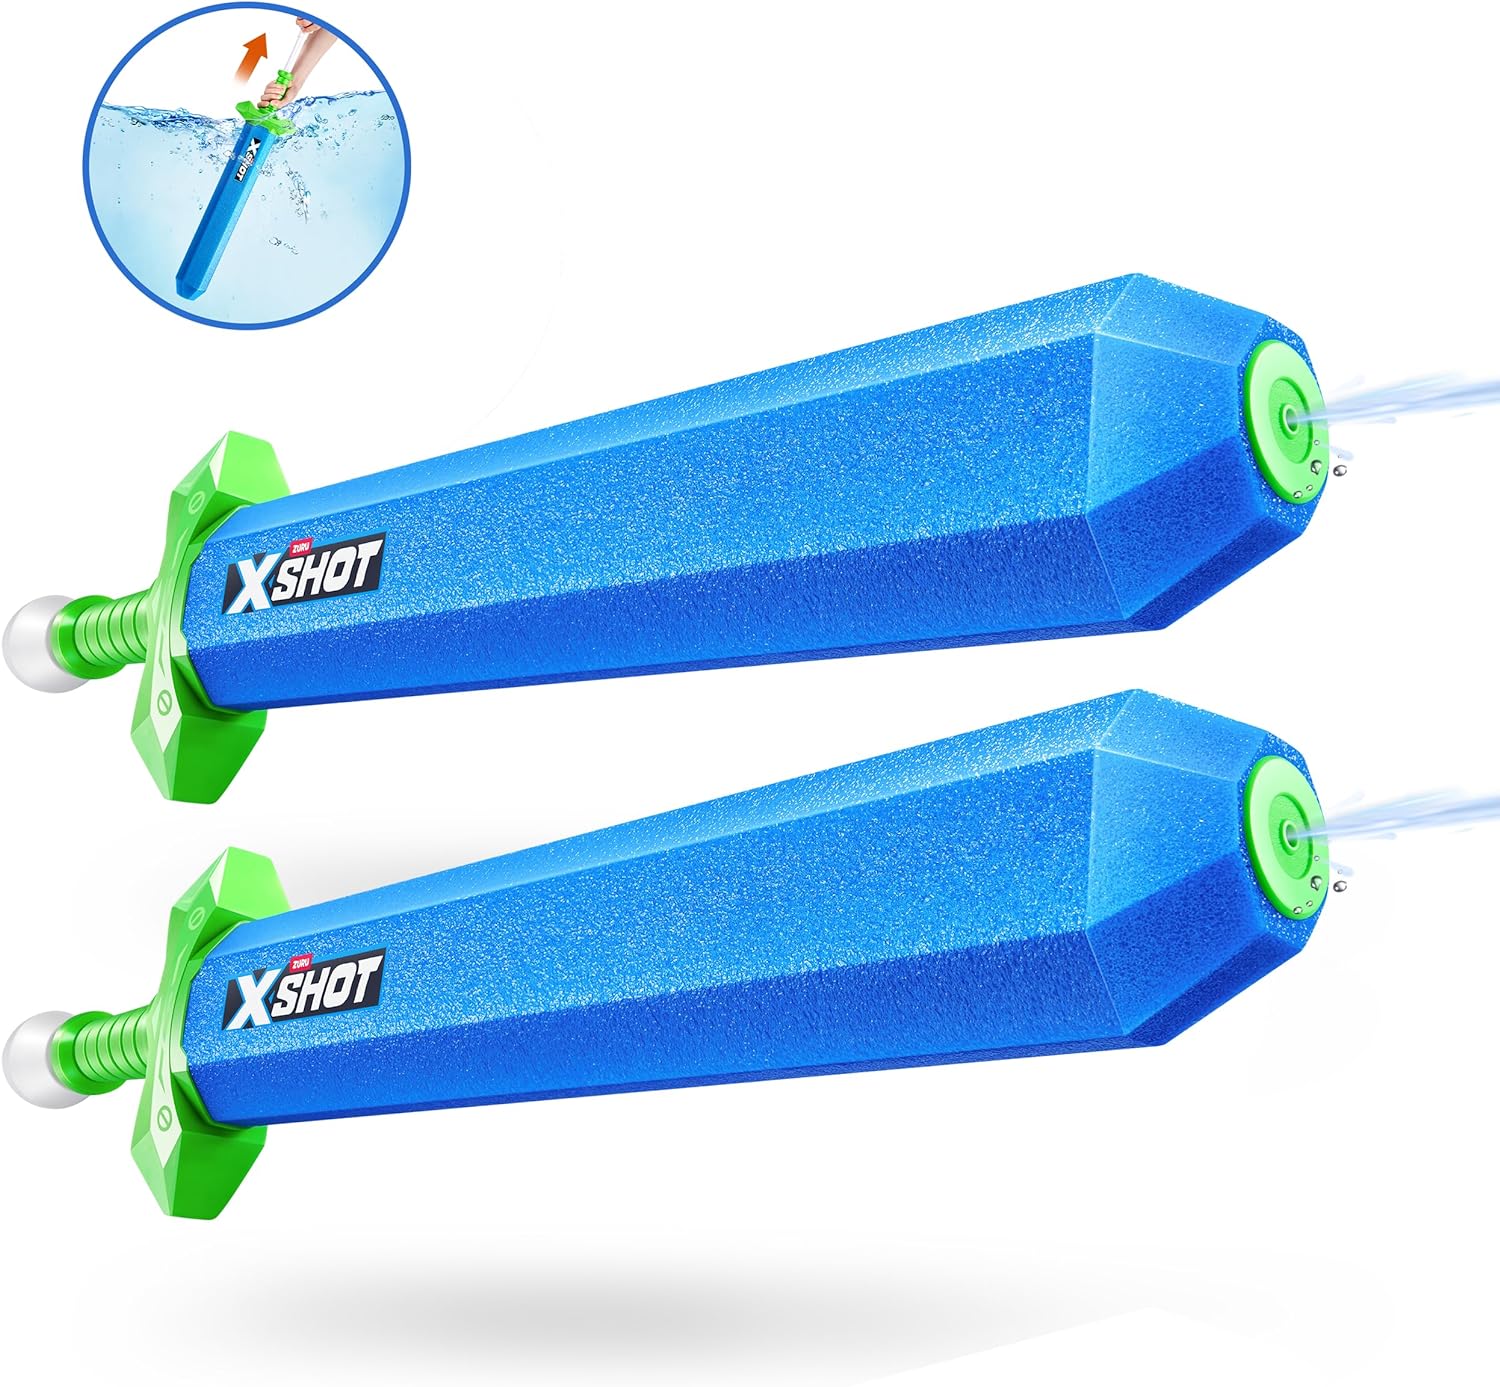 X-Shot Water Warfare Water Sword 2 Pack, Dual Play Water Toy, Sword Play and Water Battles, Big Water Toy for Children, Teen and Adults